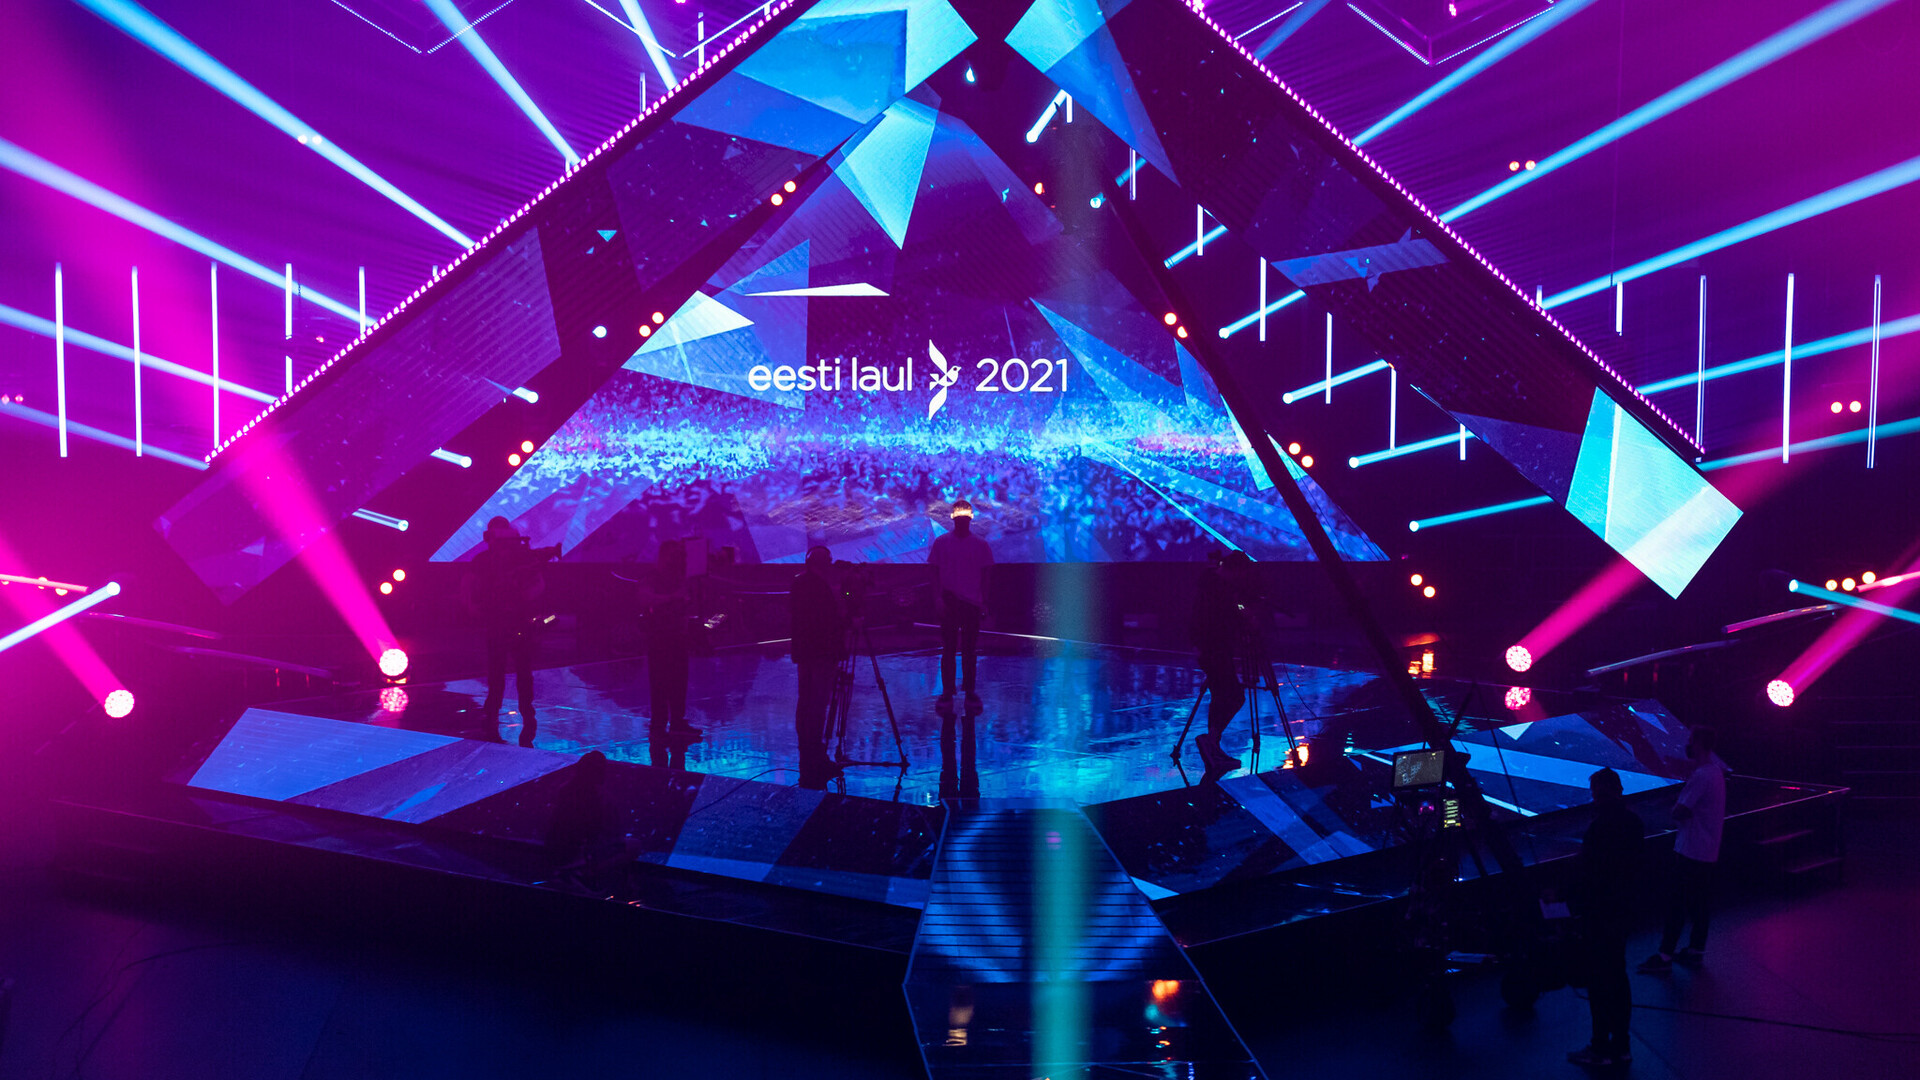 Tonight: Second semifinal of Eesti Laul 2021 to take place in Estonia